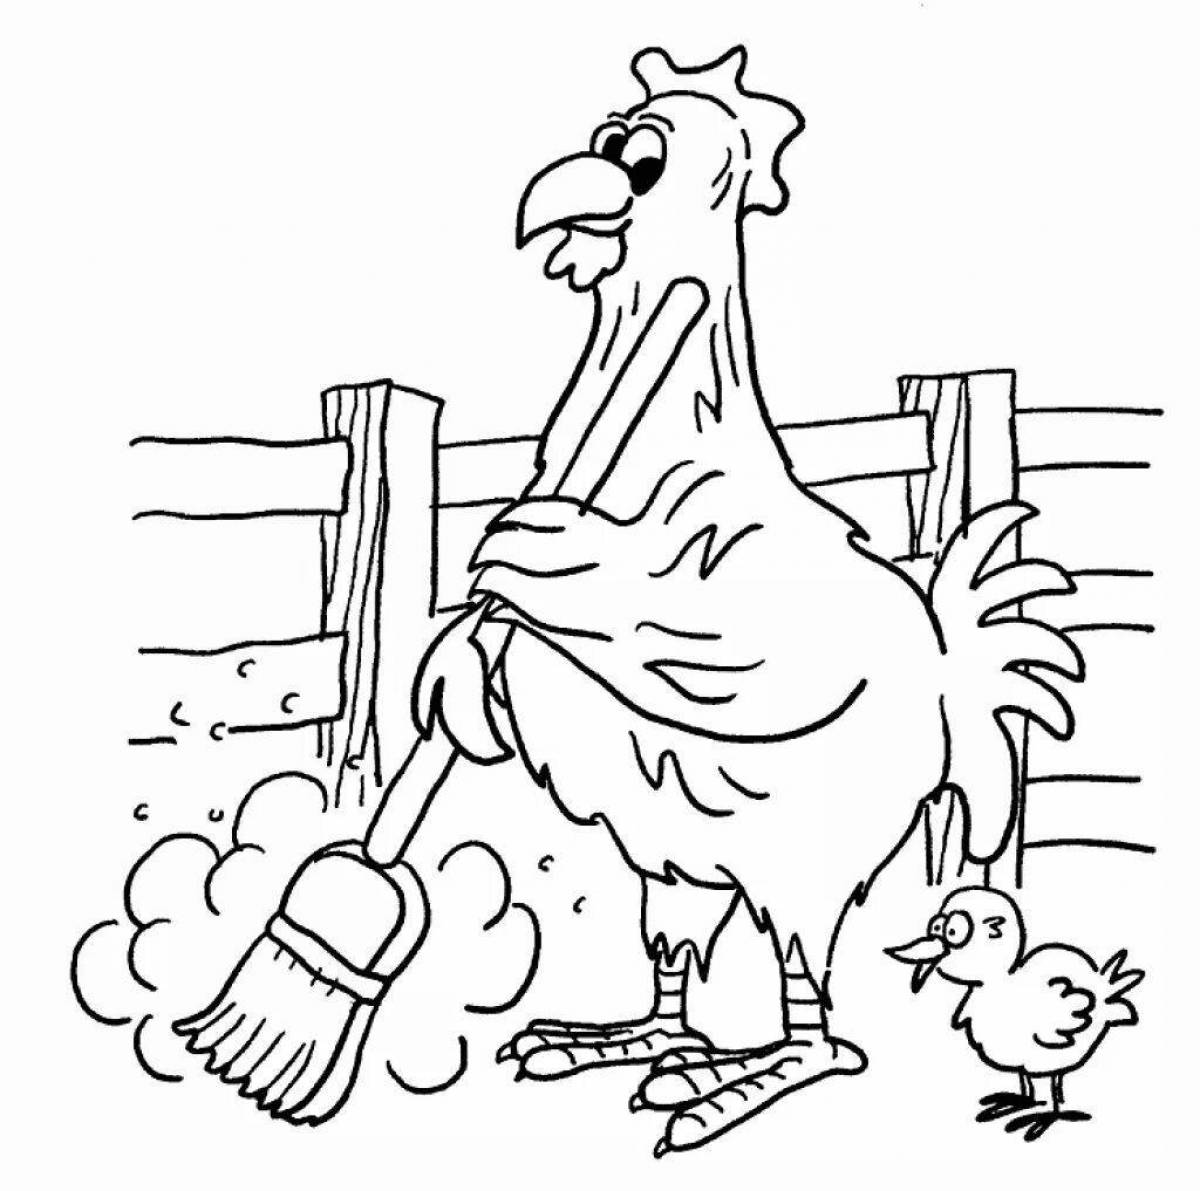 Fancy rooster and hen coloring page